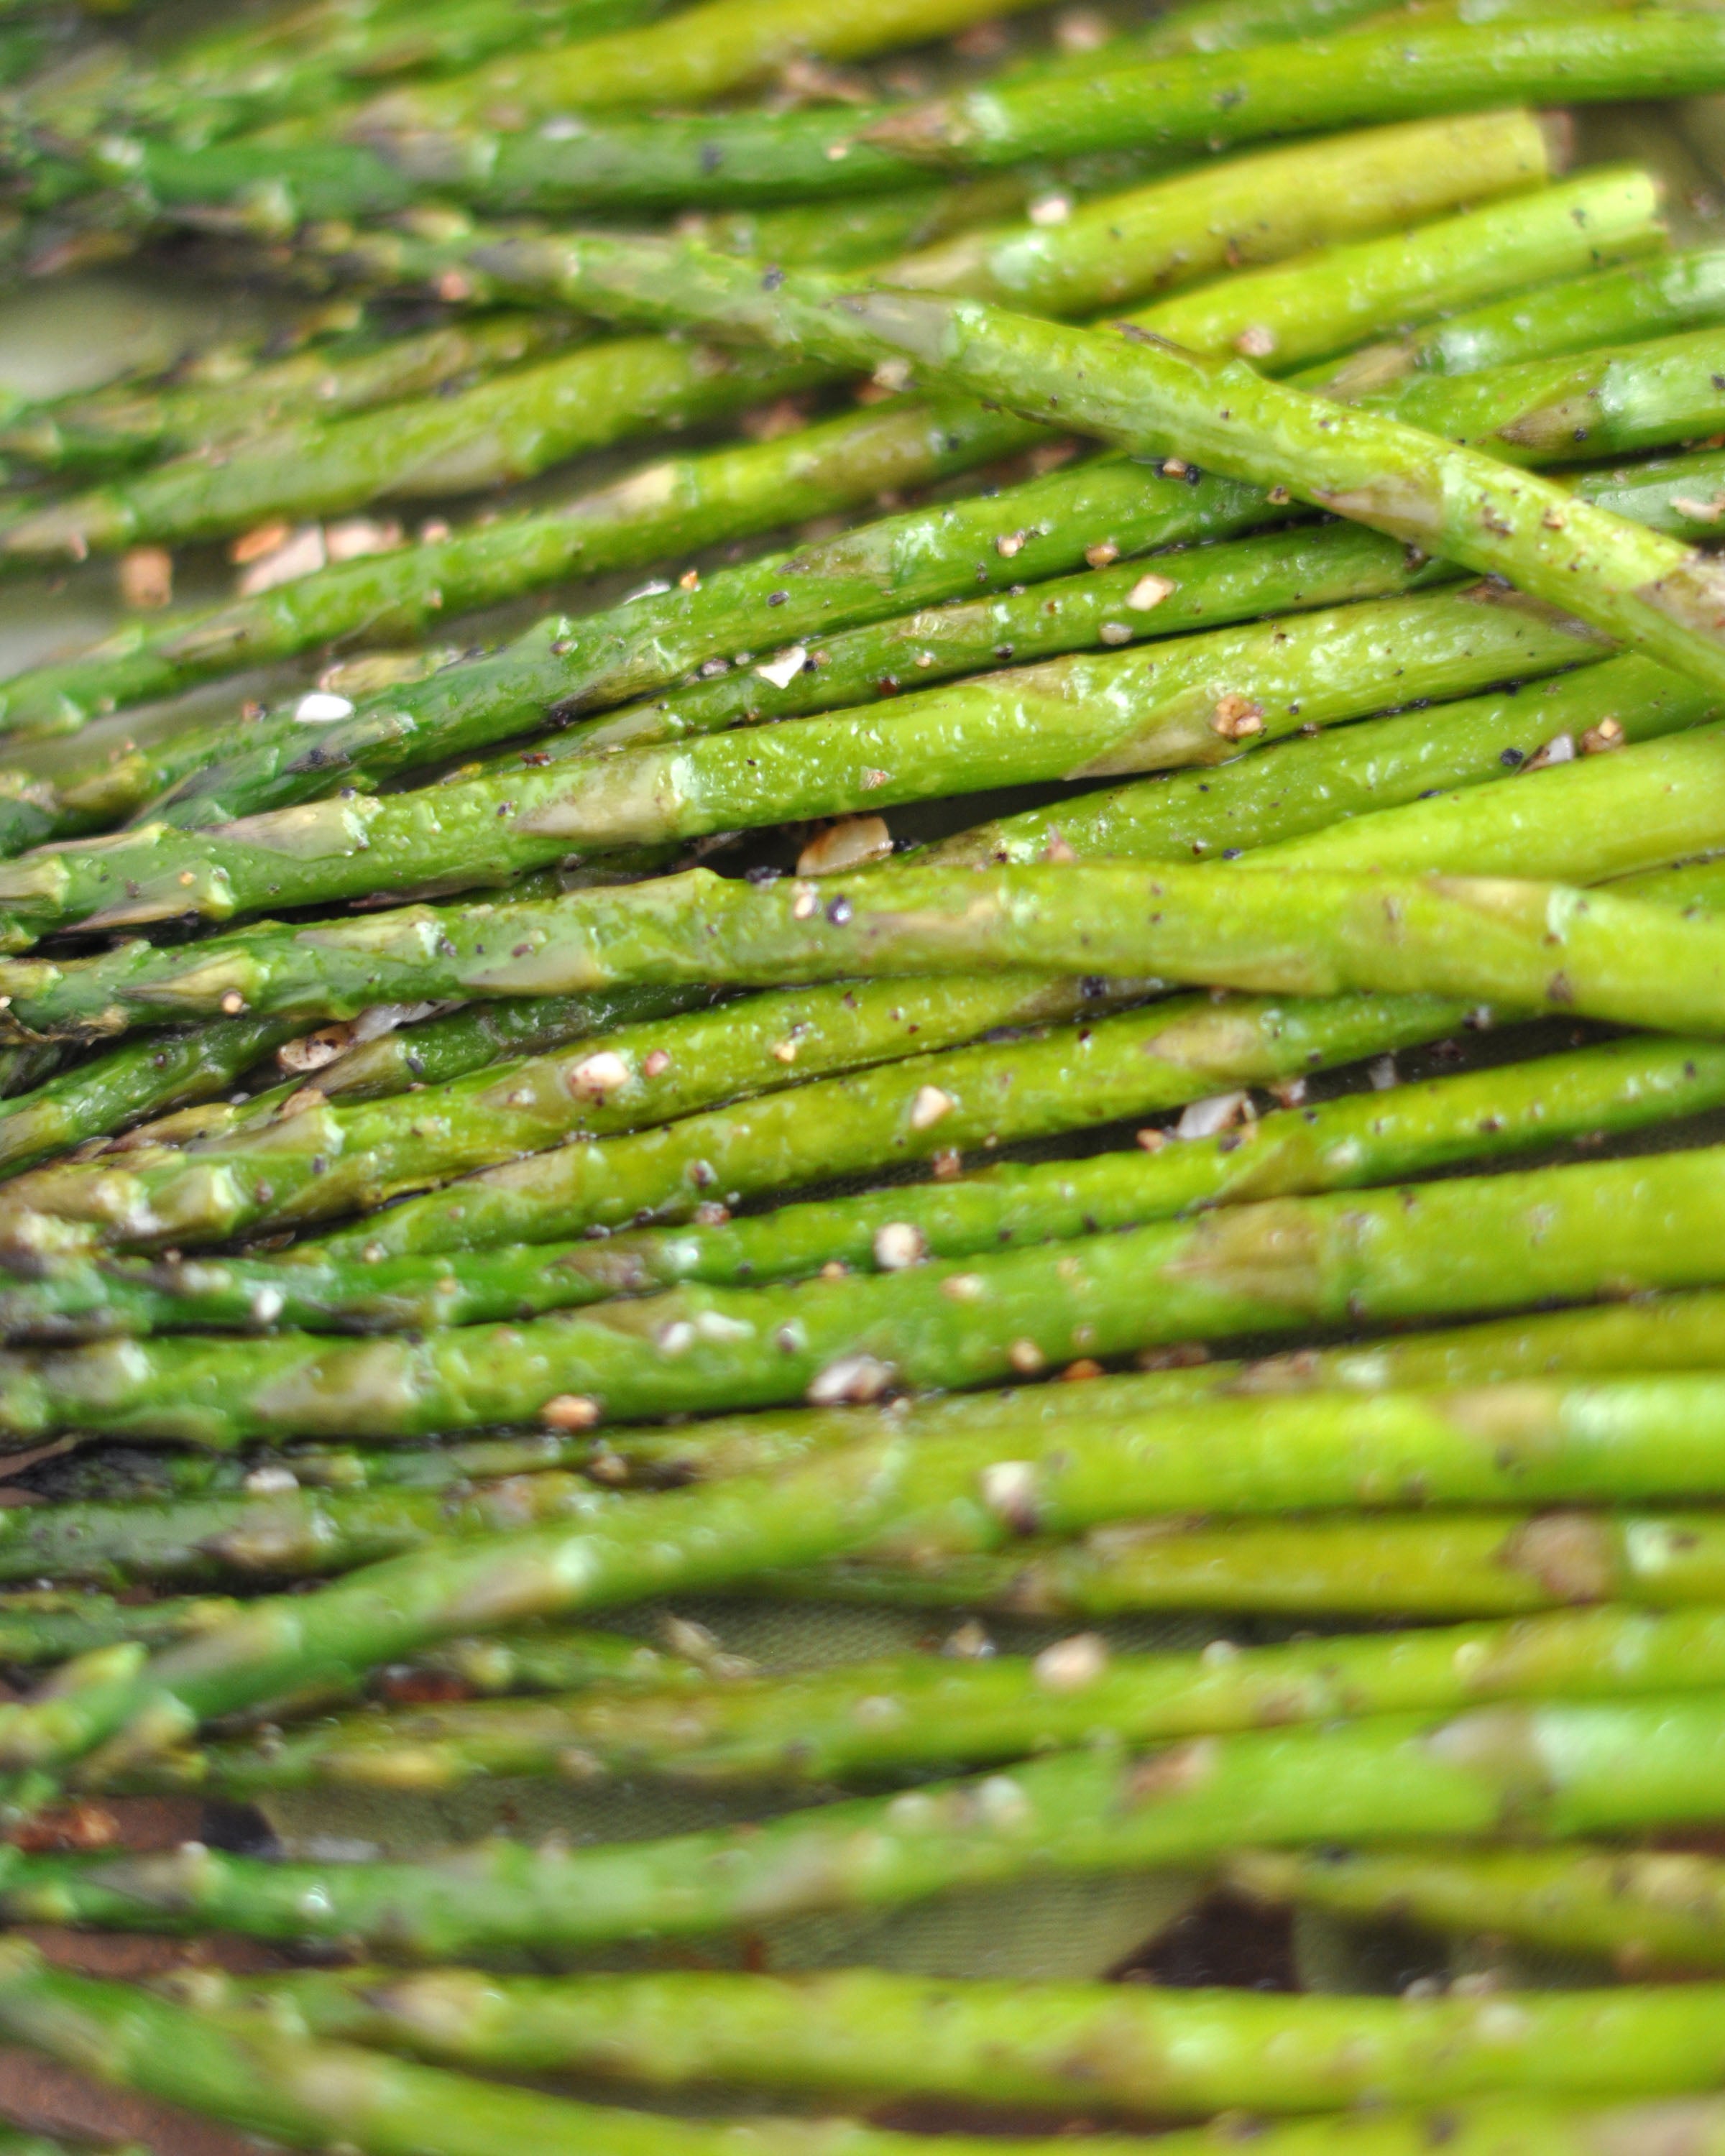 ROASTED ASPARAGUS WITH GREMOLATA